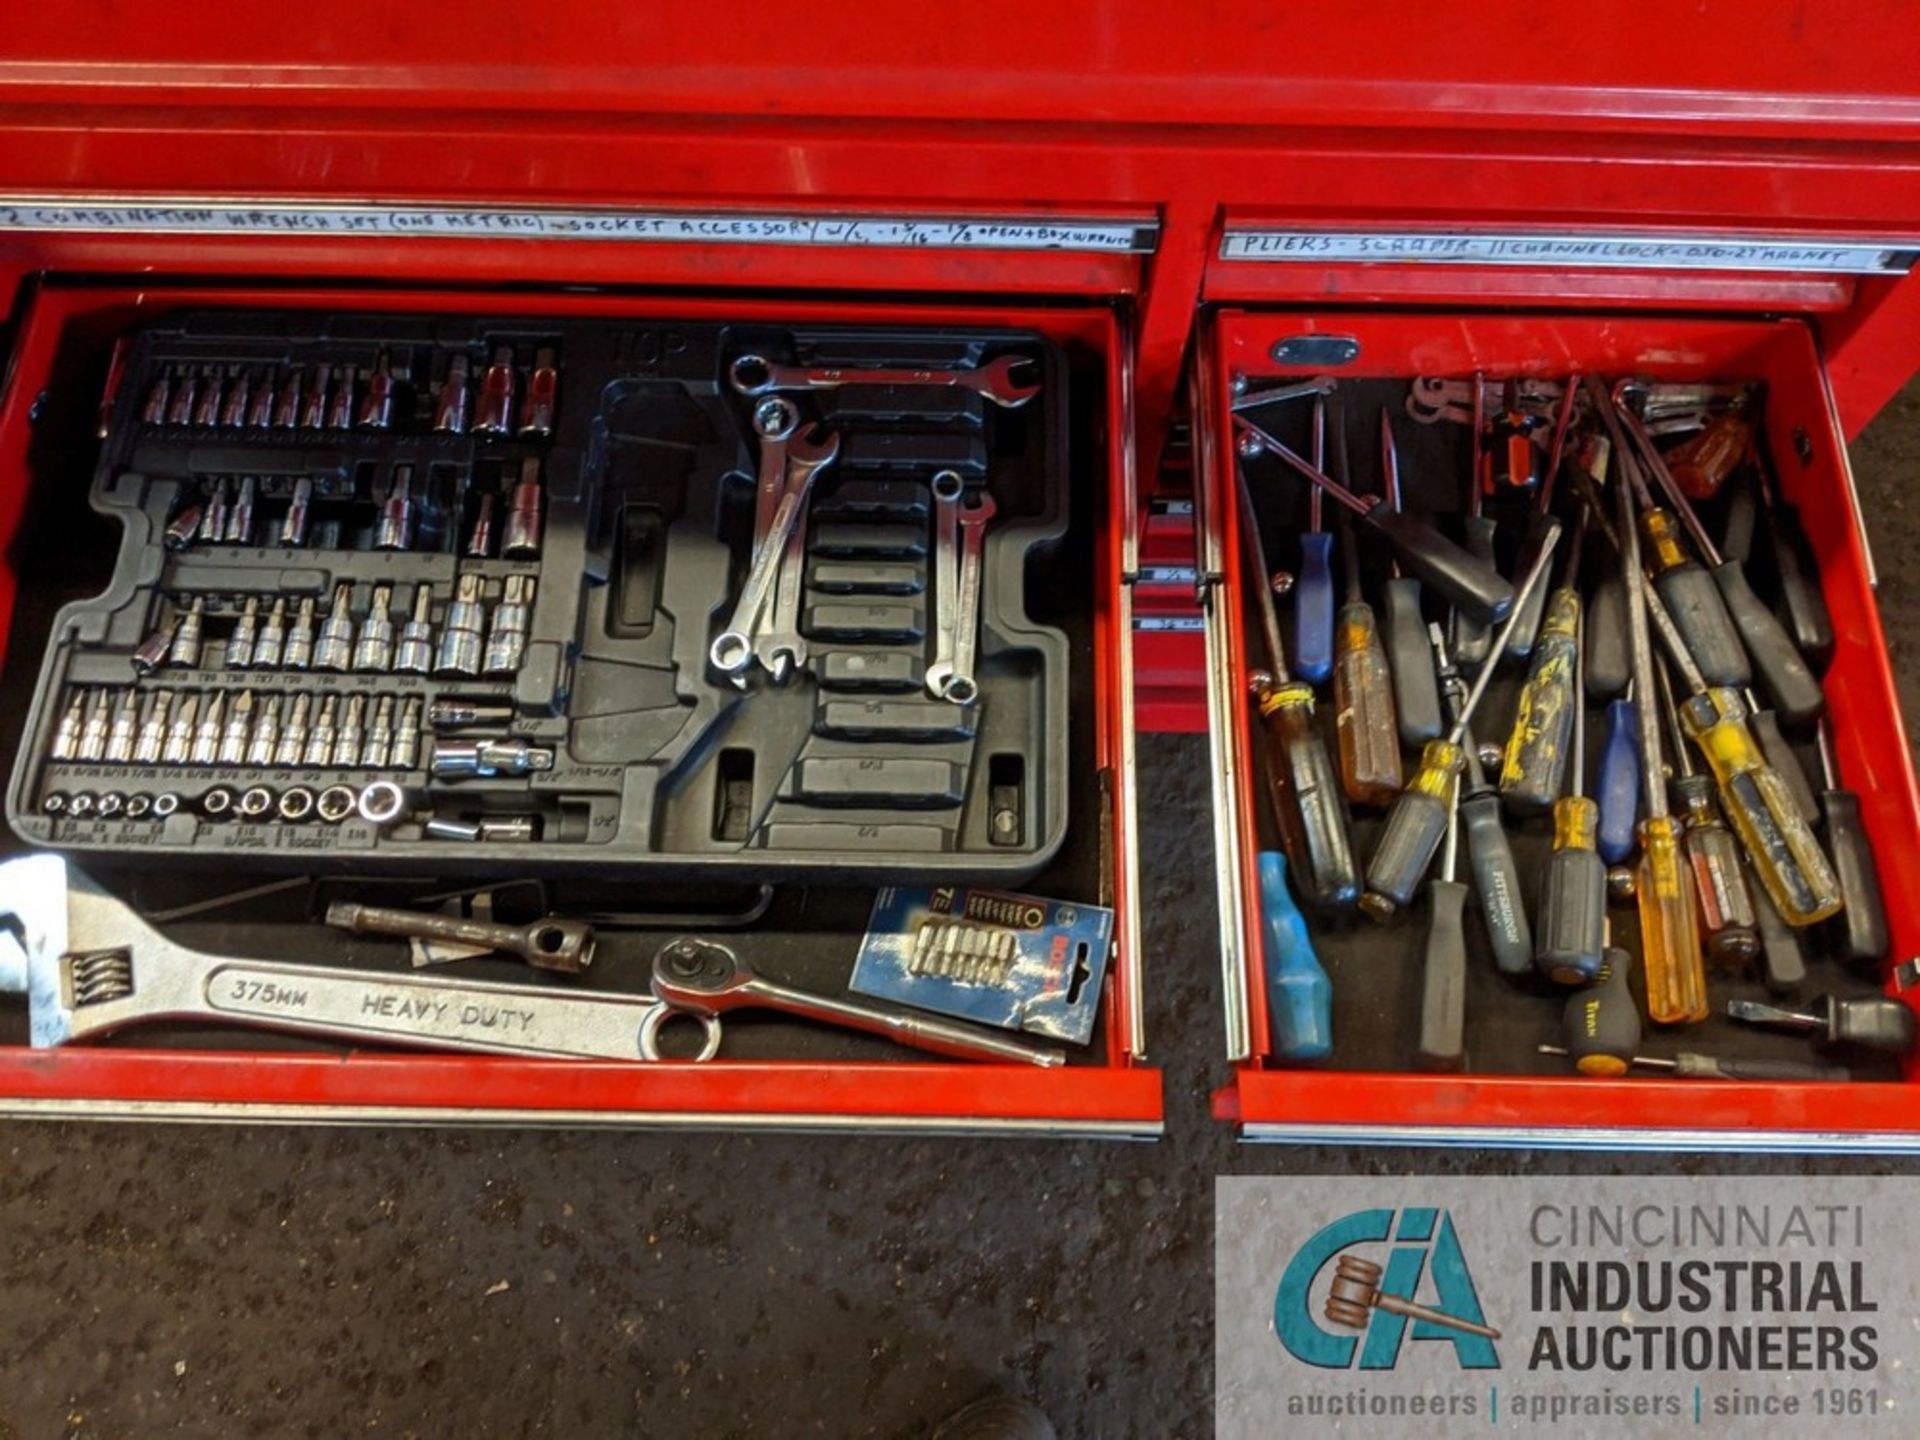 13-DRAWER US GENERAL PORTABLE TOOL BOX WITH TOOLS IN EACH DRAWER AND IMPACT SOCKETS ON RATCHETS ON - Image 6 of 10